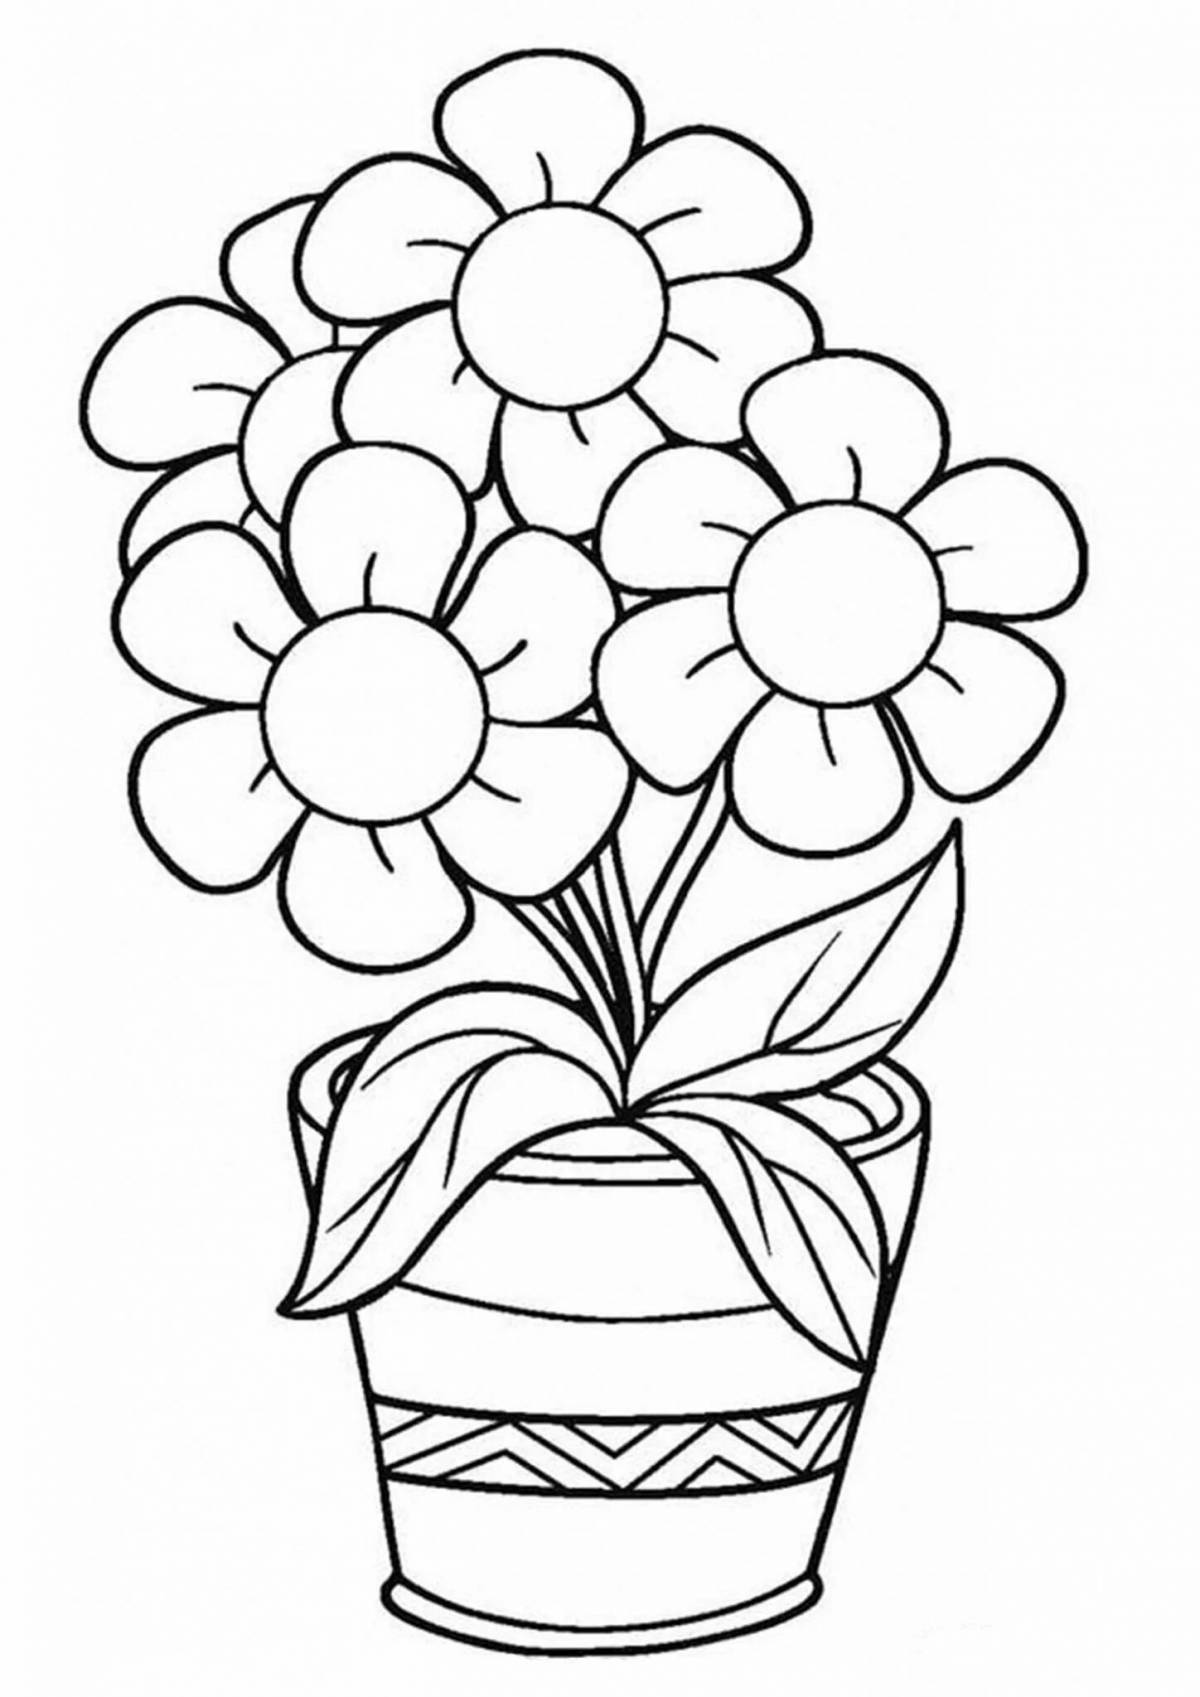 Flowers in a vase coloring for teenagers